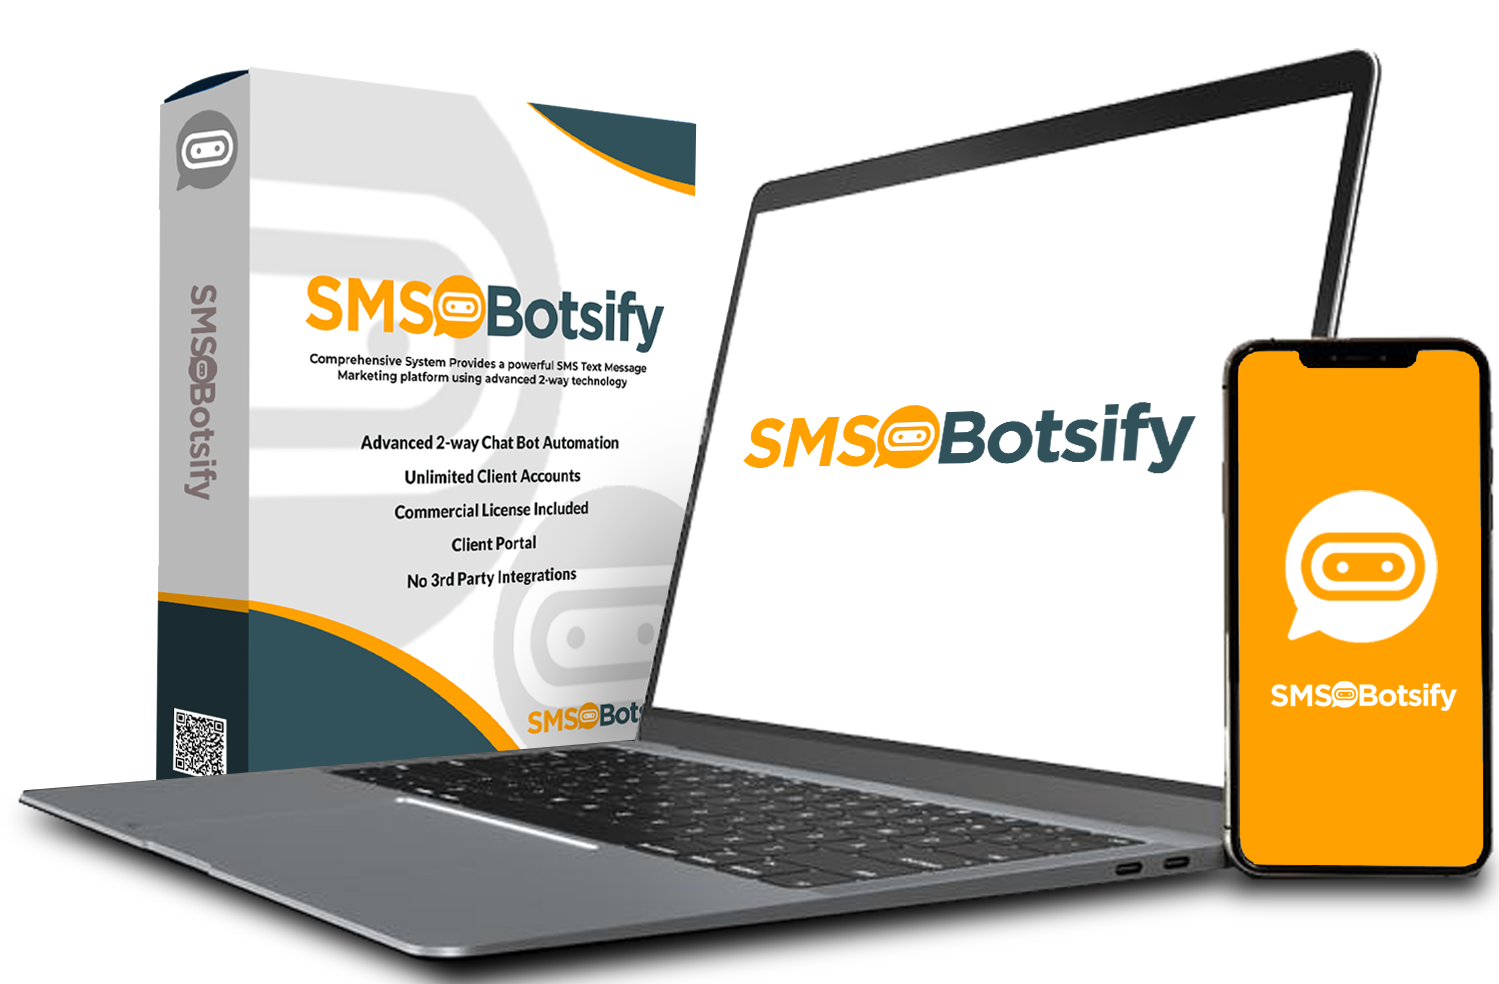 SMSBotsify Review - The No. 1 Chat Bot Automation In 2 Ways To Build Lists, Engage And Make Sales Easily!